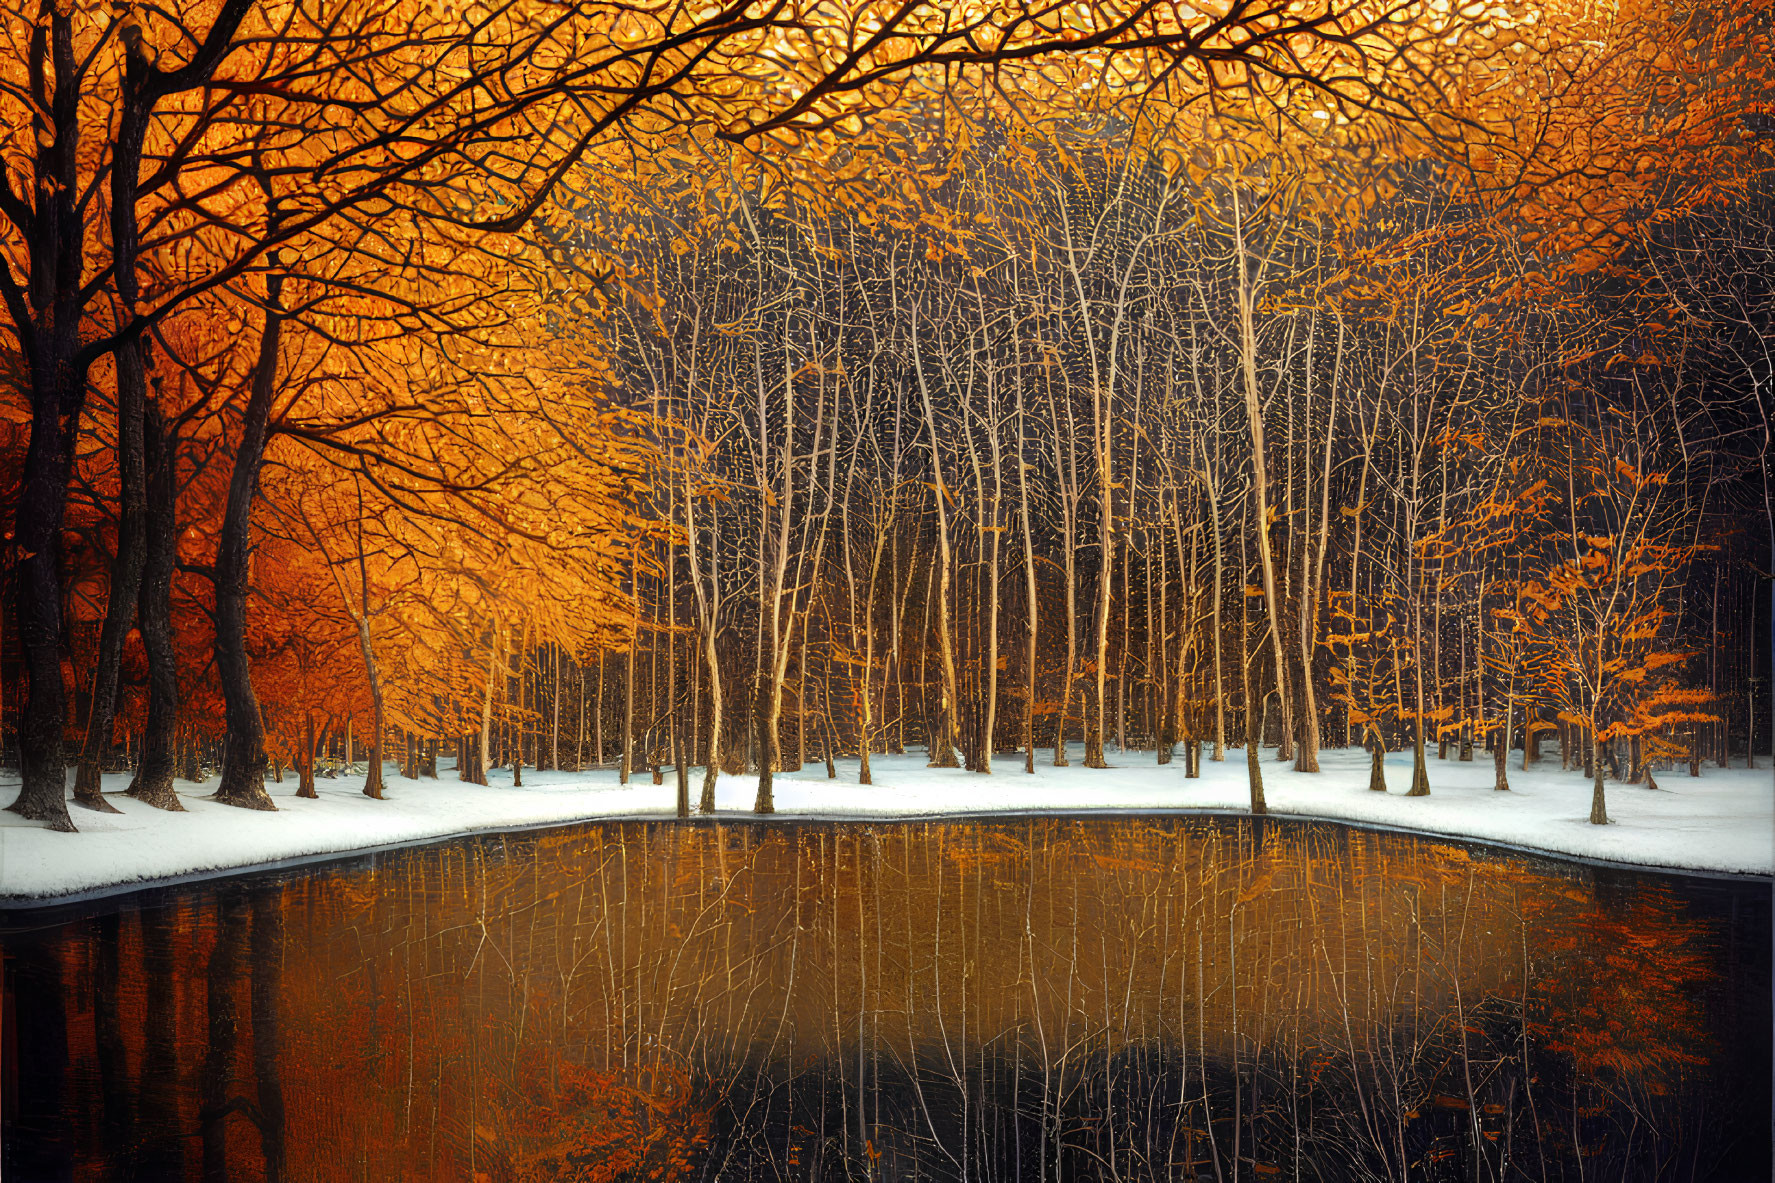 Tranquil winter pond with snow-covered trees and golden leaves reflected